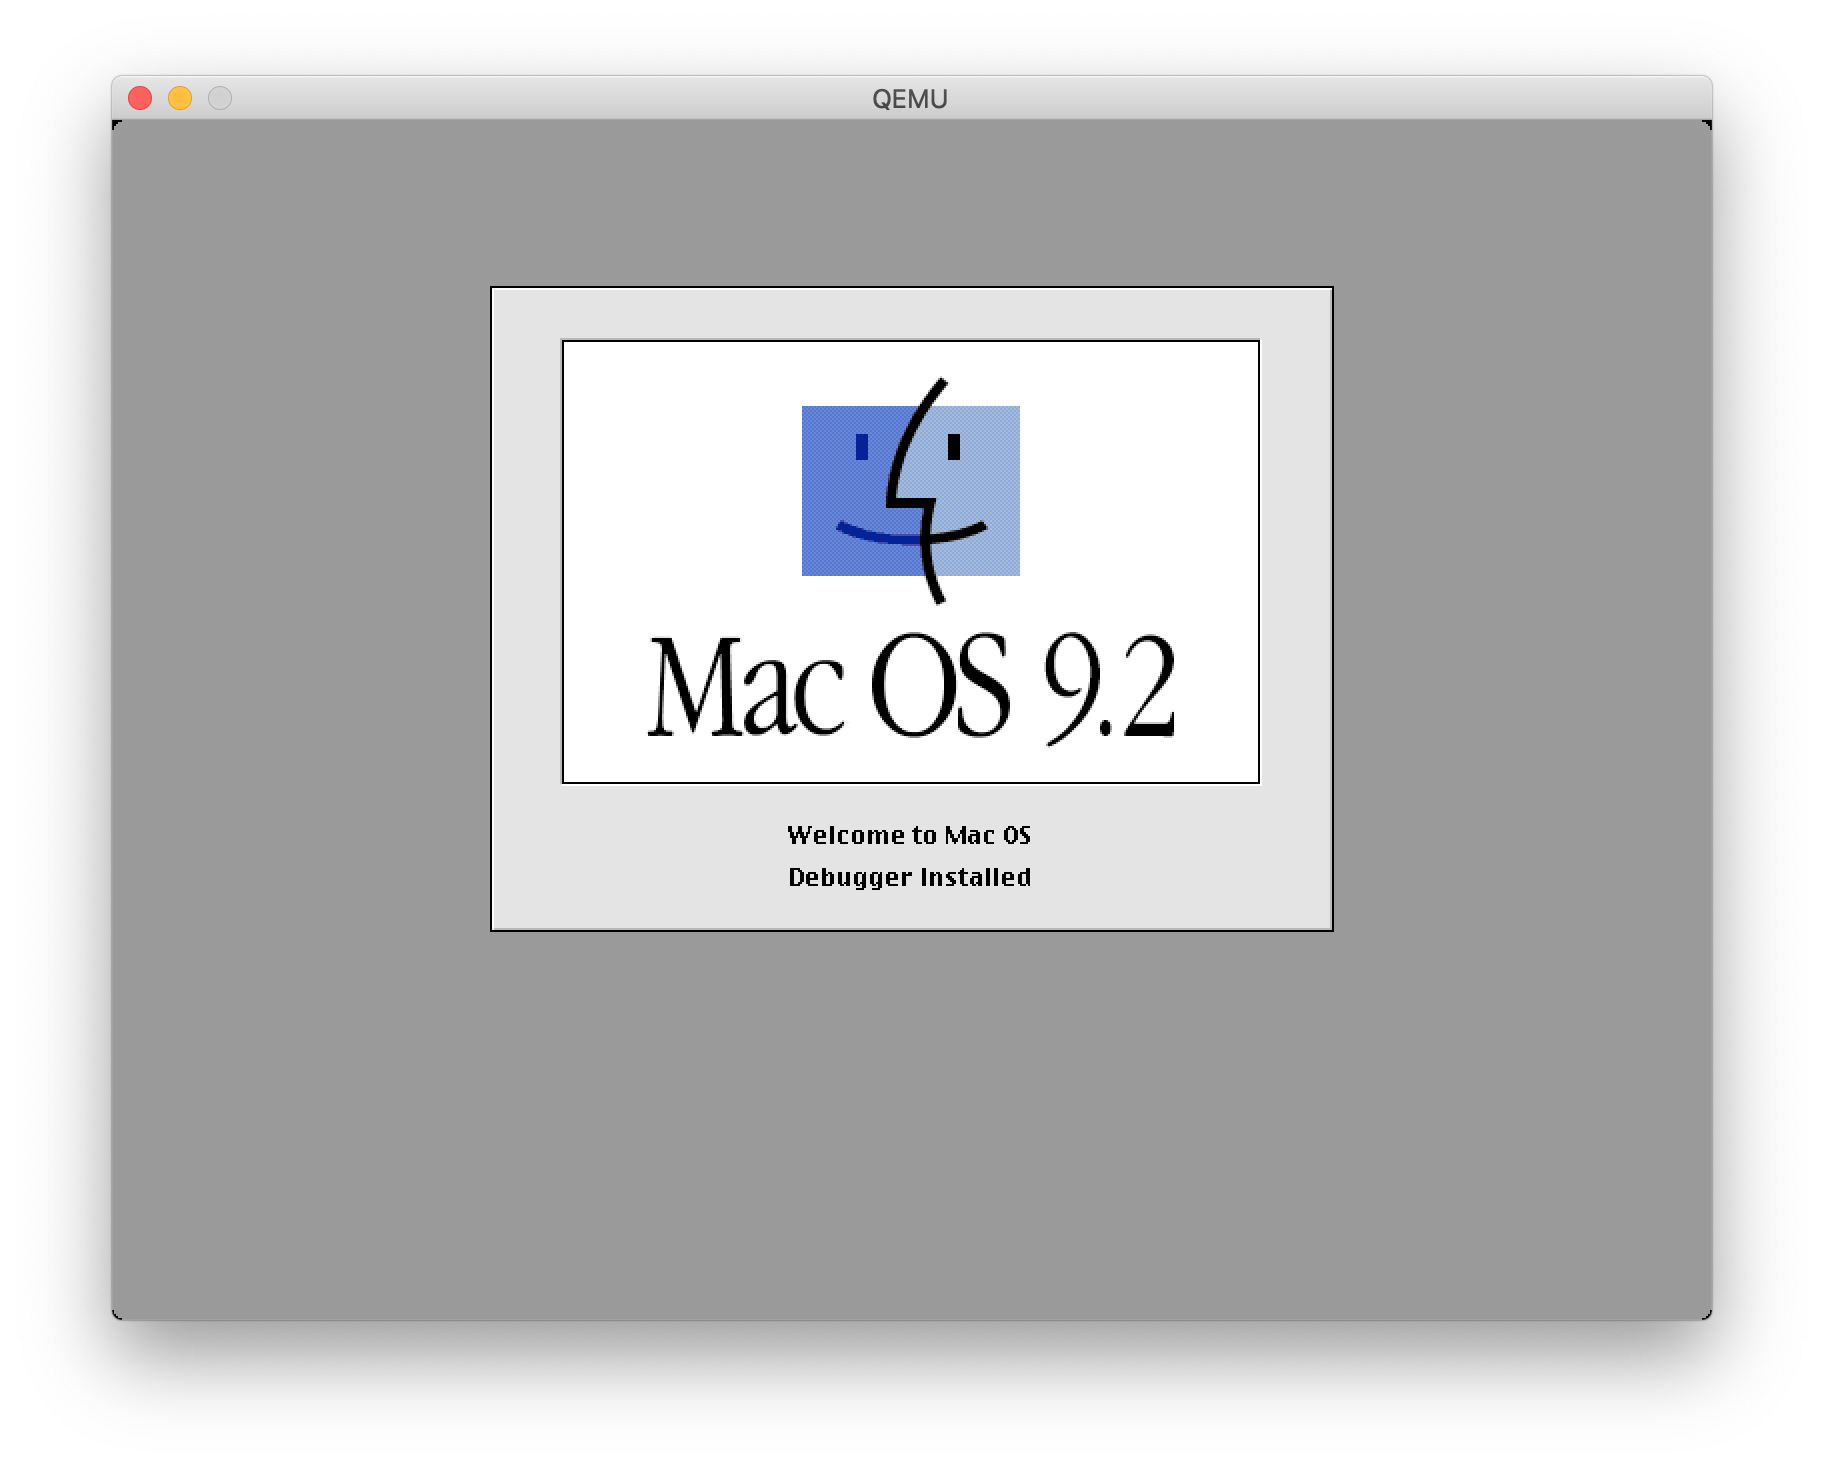 Mac OS boot screen in QEMU, showing that the debugger has been installed